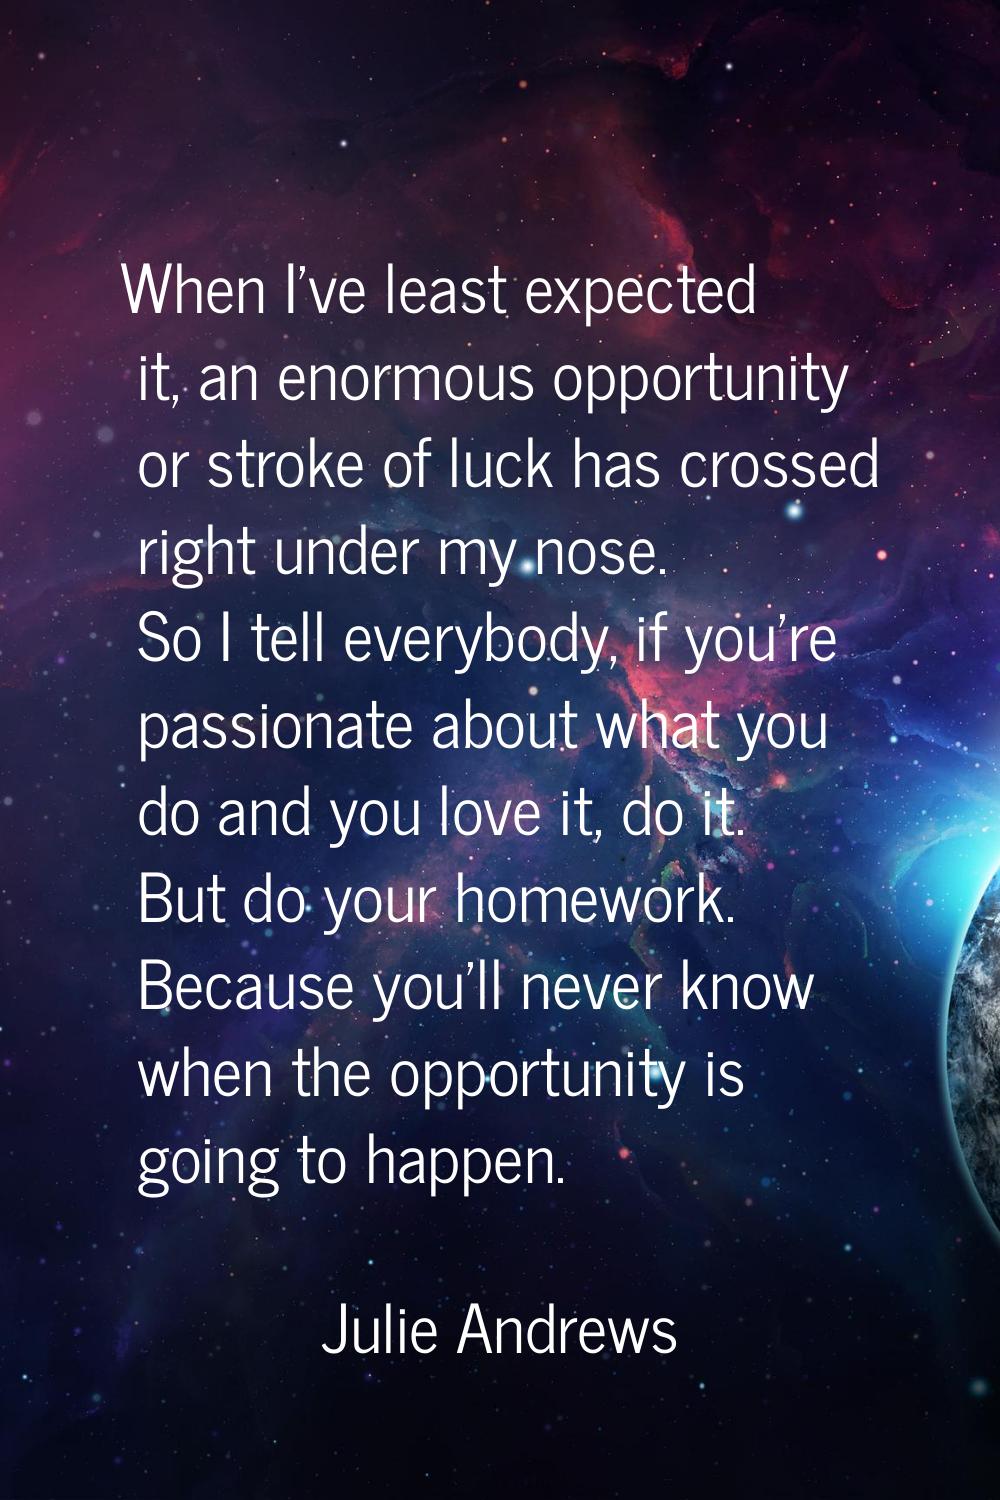 When I've least expected it, an enormous opportunity or stroke of luck has crossed right under my n